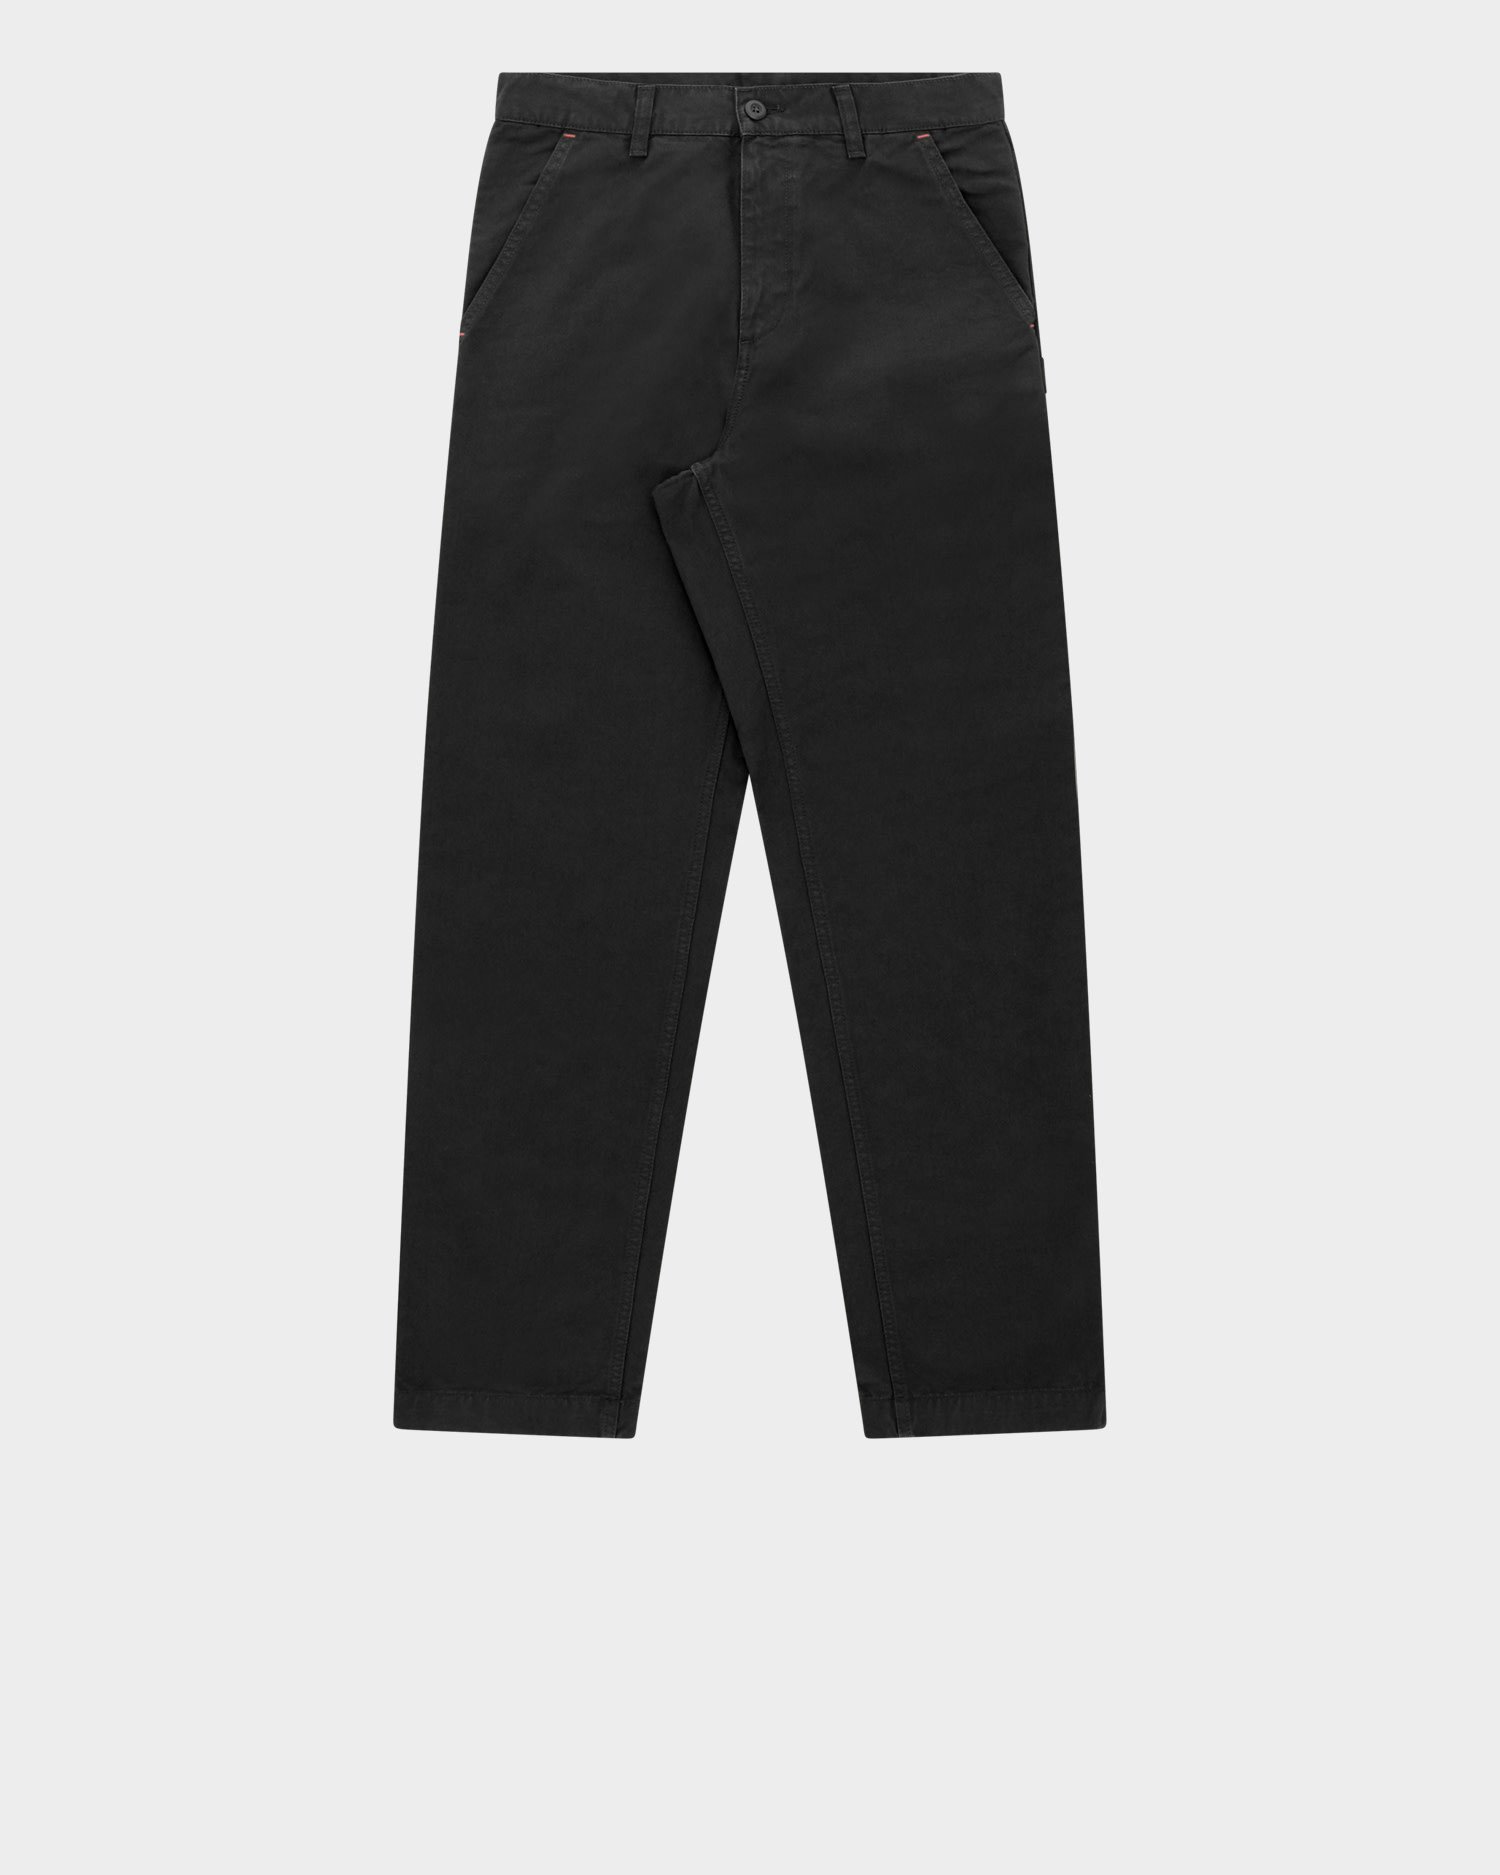 Carhartt Wesley Pant 'Newcomb' Drill Stormcloud garment dyed